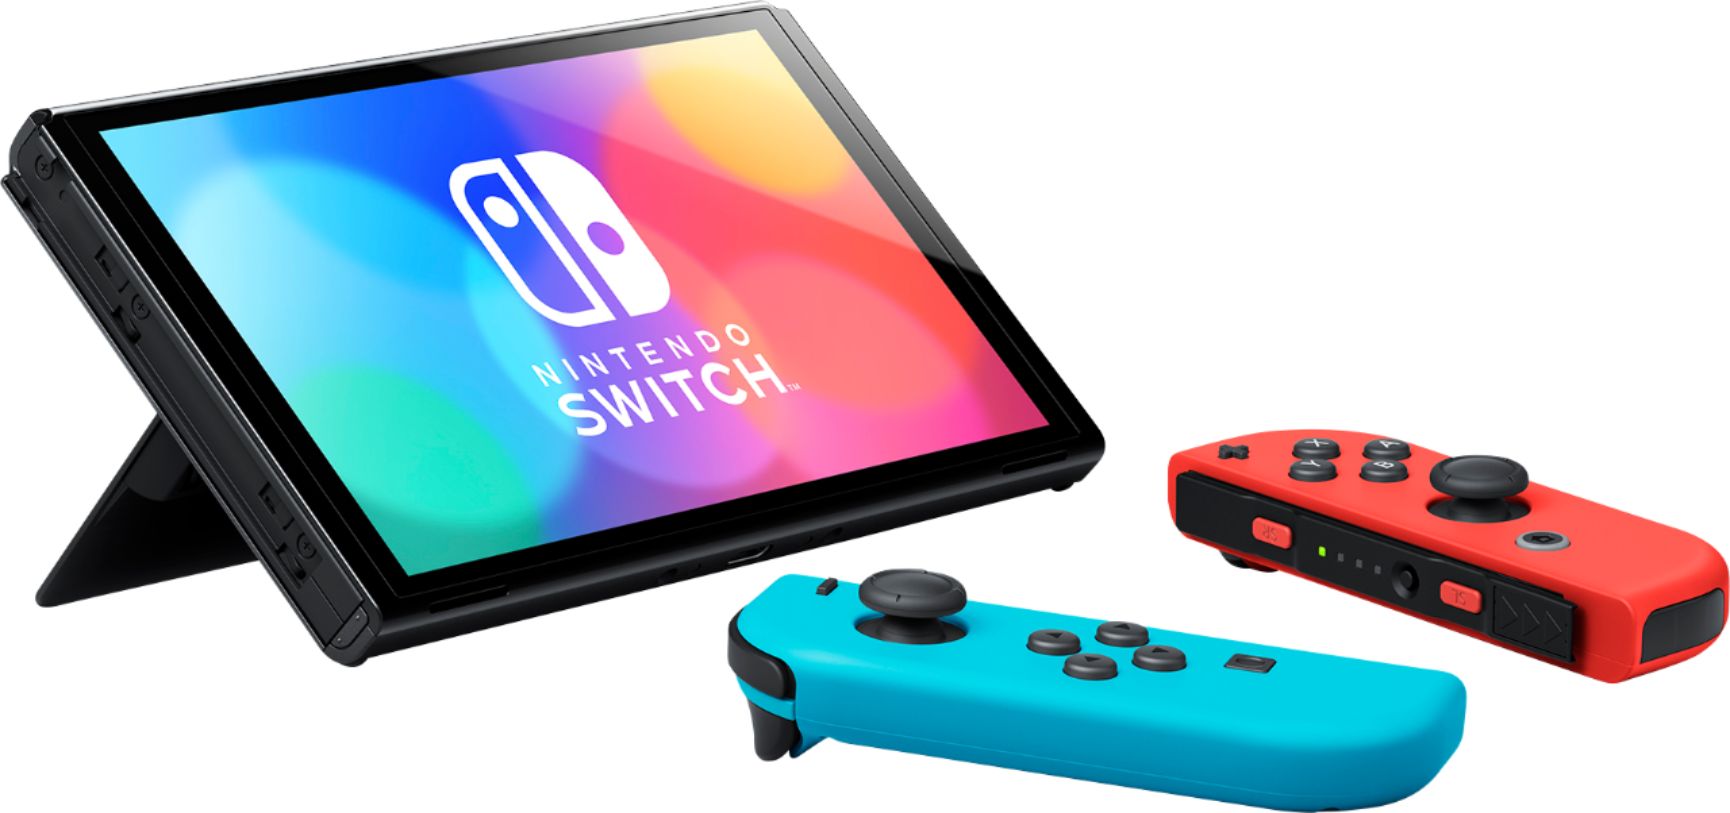 2022 New Nintendo Switch OLED Model Neon Red Blue with Pokemon Brilliant Diamond and Mytrix Full Body Skin Sticker for NS OLED Console, Dock and Joycons - Sushi Set